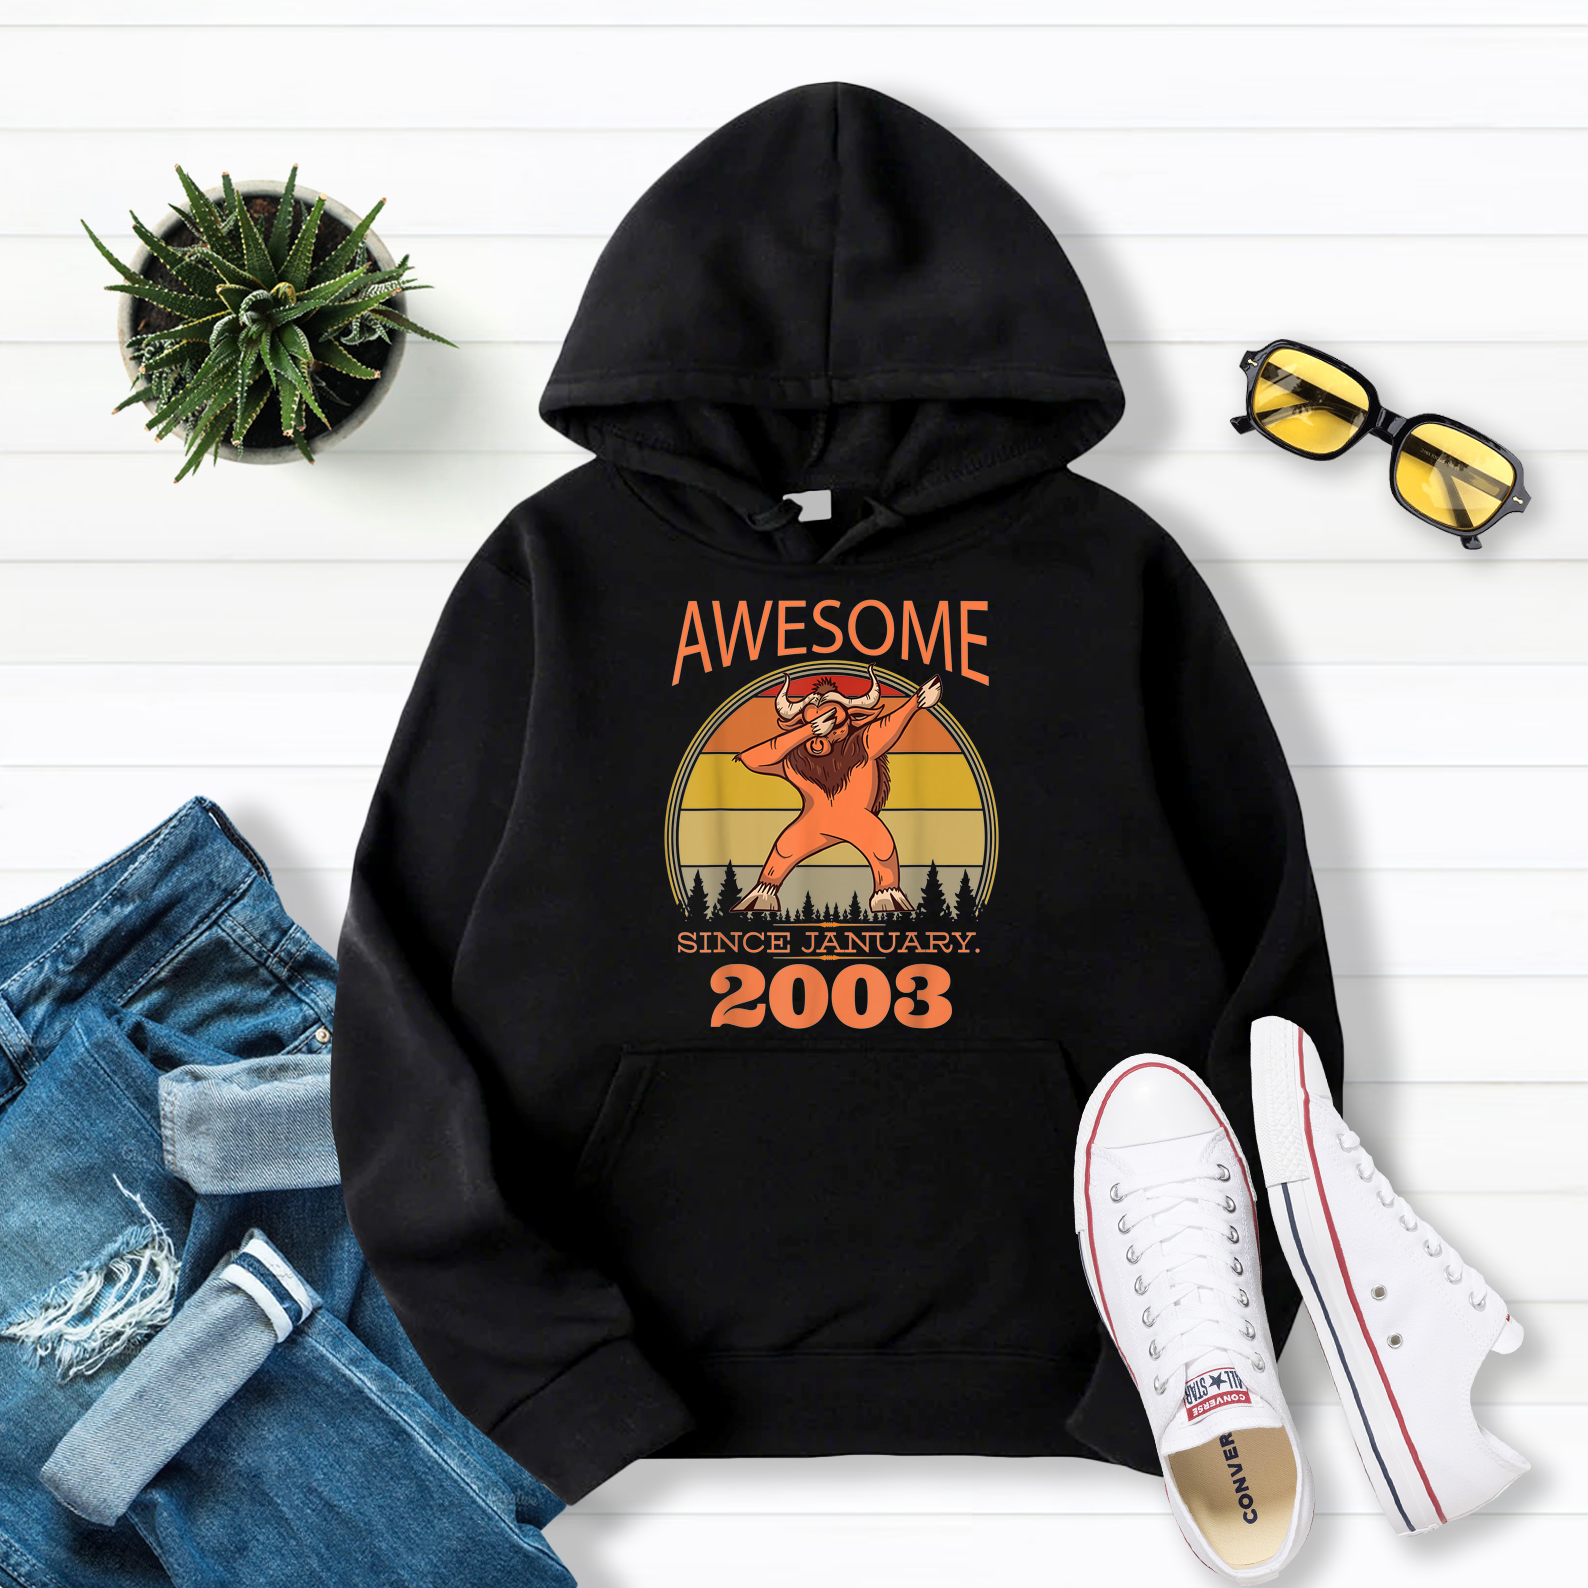 18 Years Old Birthday Awesome Since January 2003 Ox Dabbing Pullover Hoodie Black S-5XL